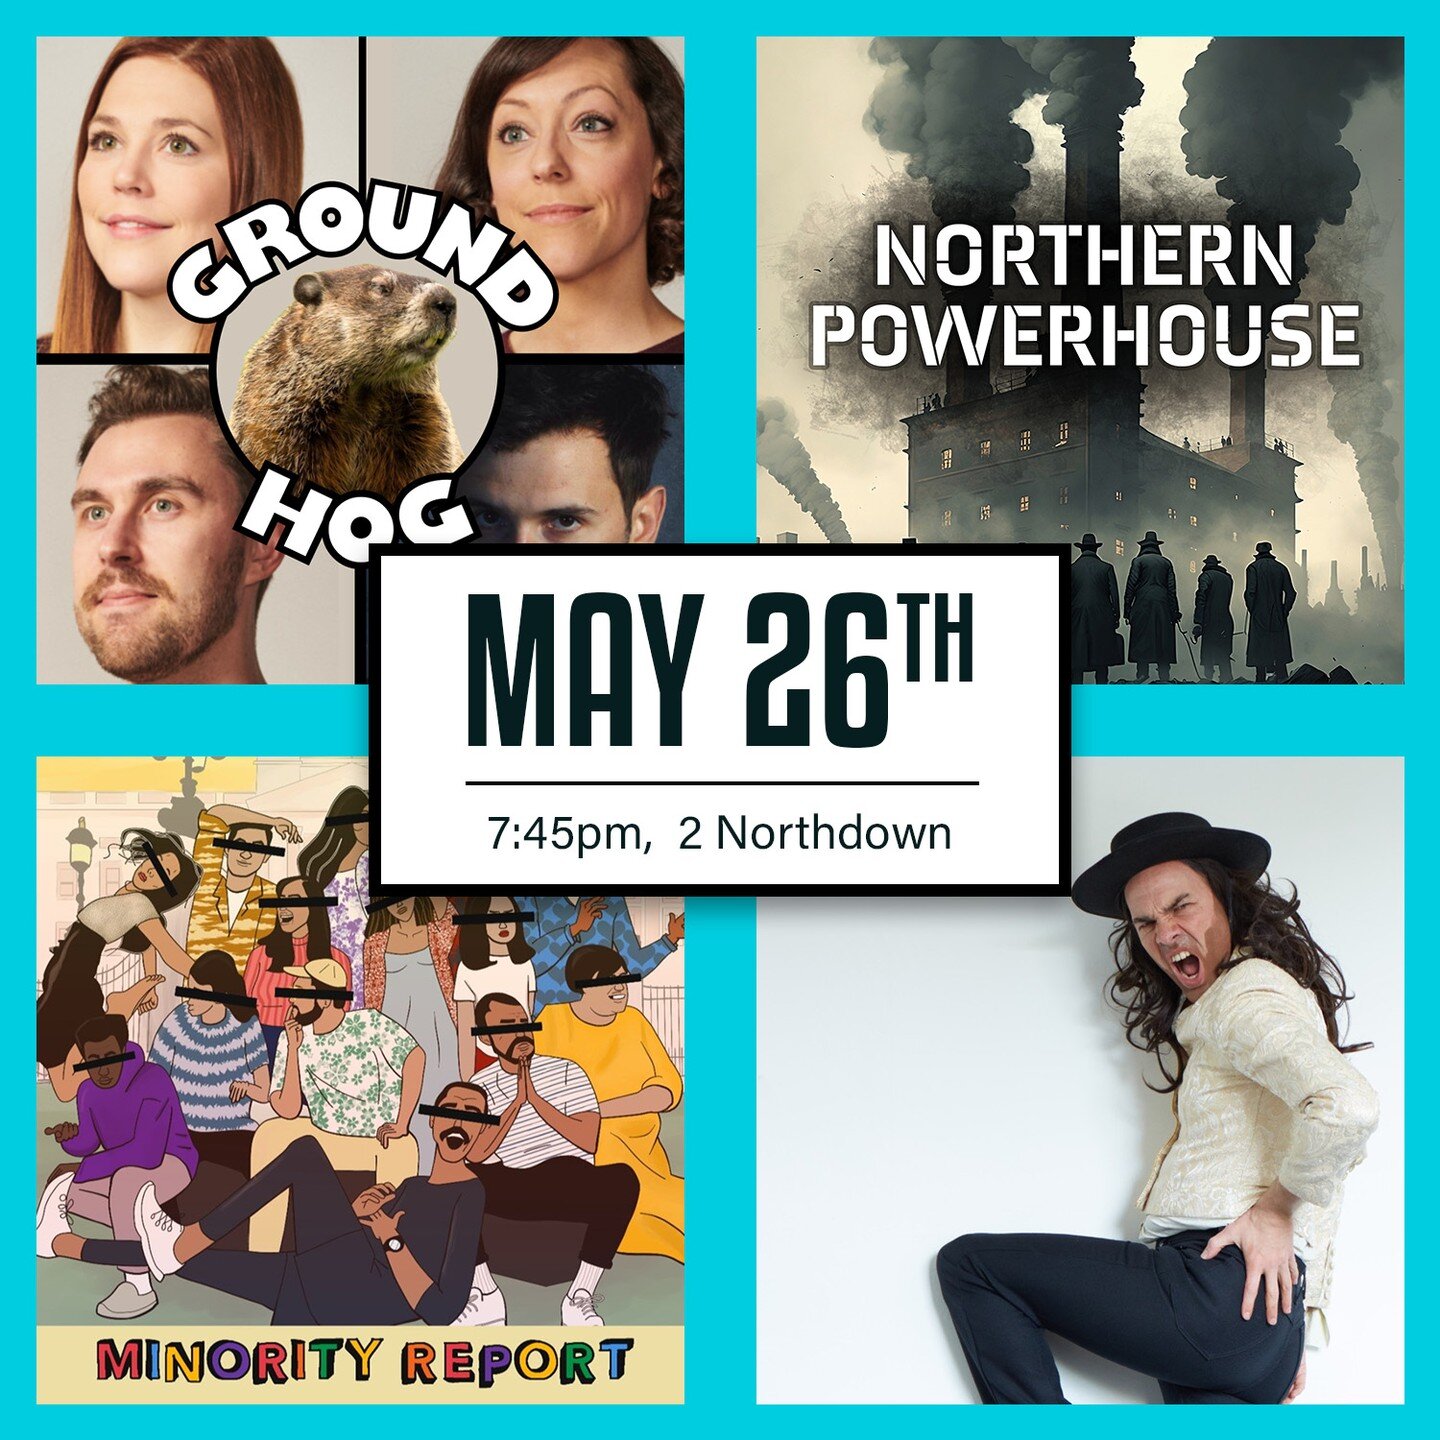 NEXT SHOW! Friday 26th of May at @2northdown. We've got some real heavy hitters this time, including @groundhogimprov, @alexywalexycomedy, and @minorityreport_improv as well as the debut of star-studded team Northern Powerhouse! We also have one more